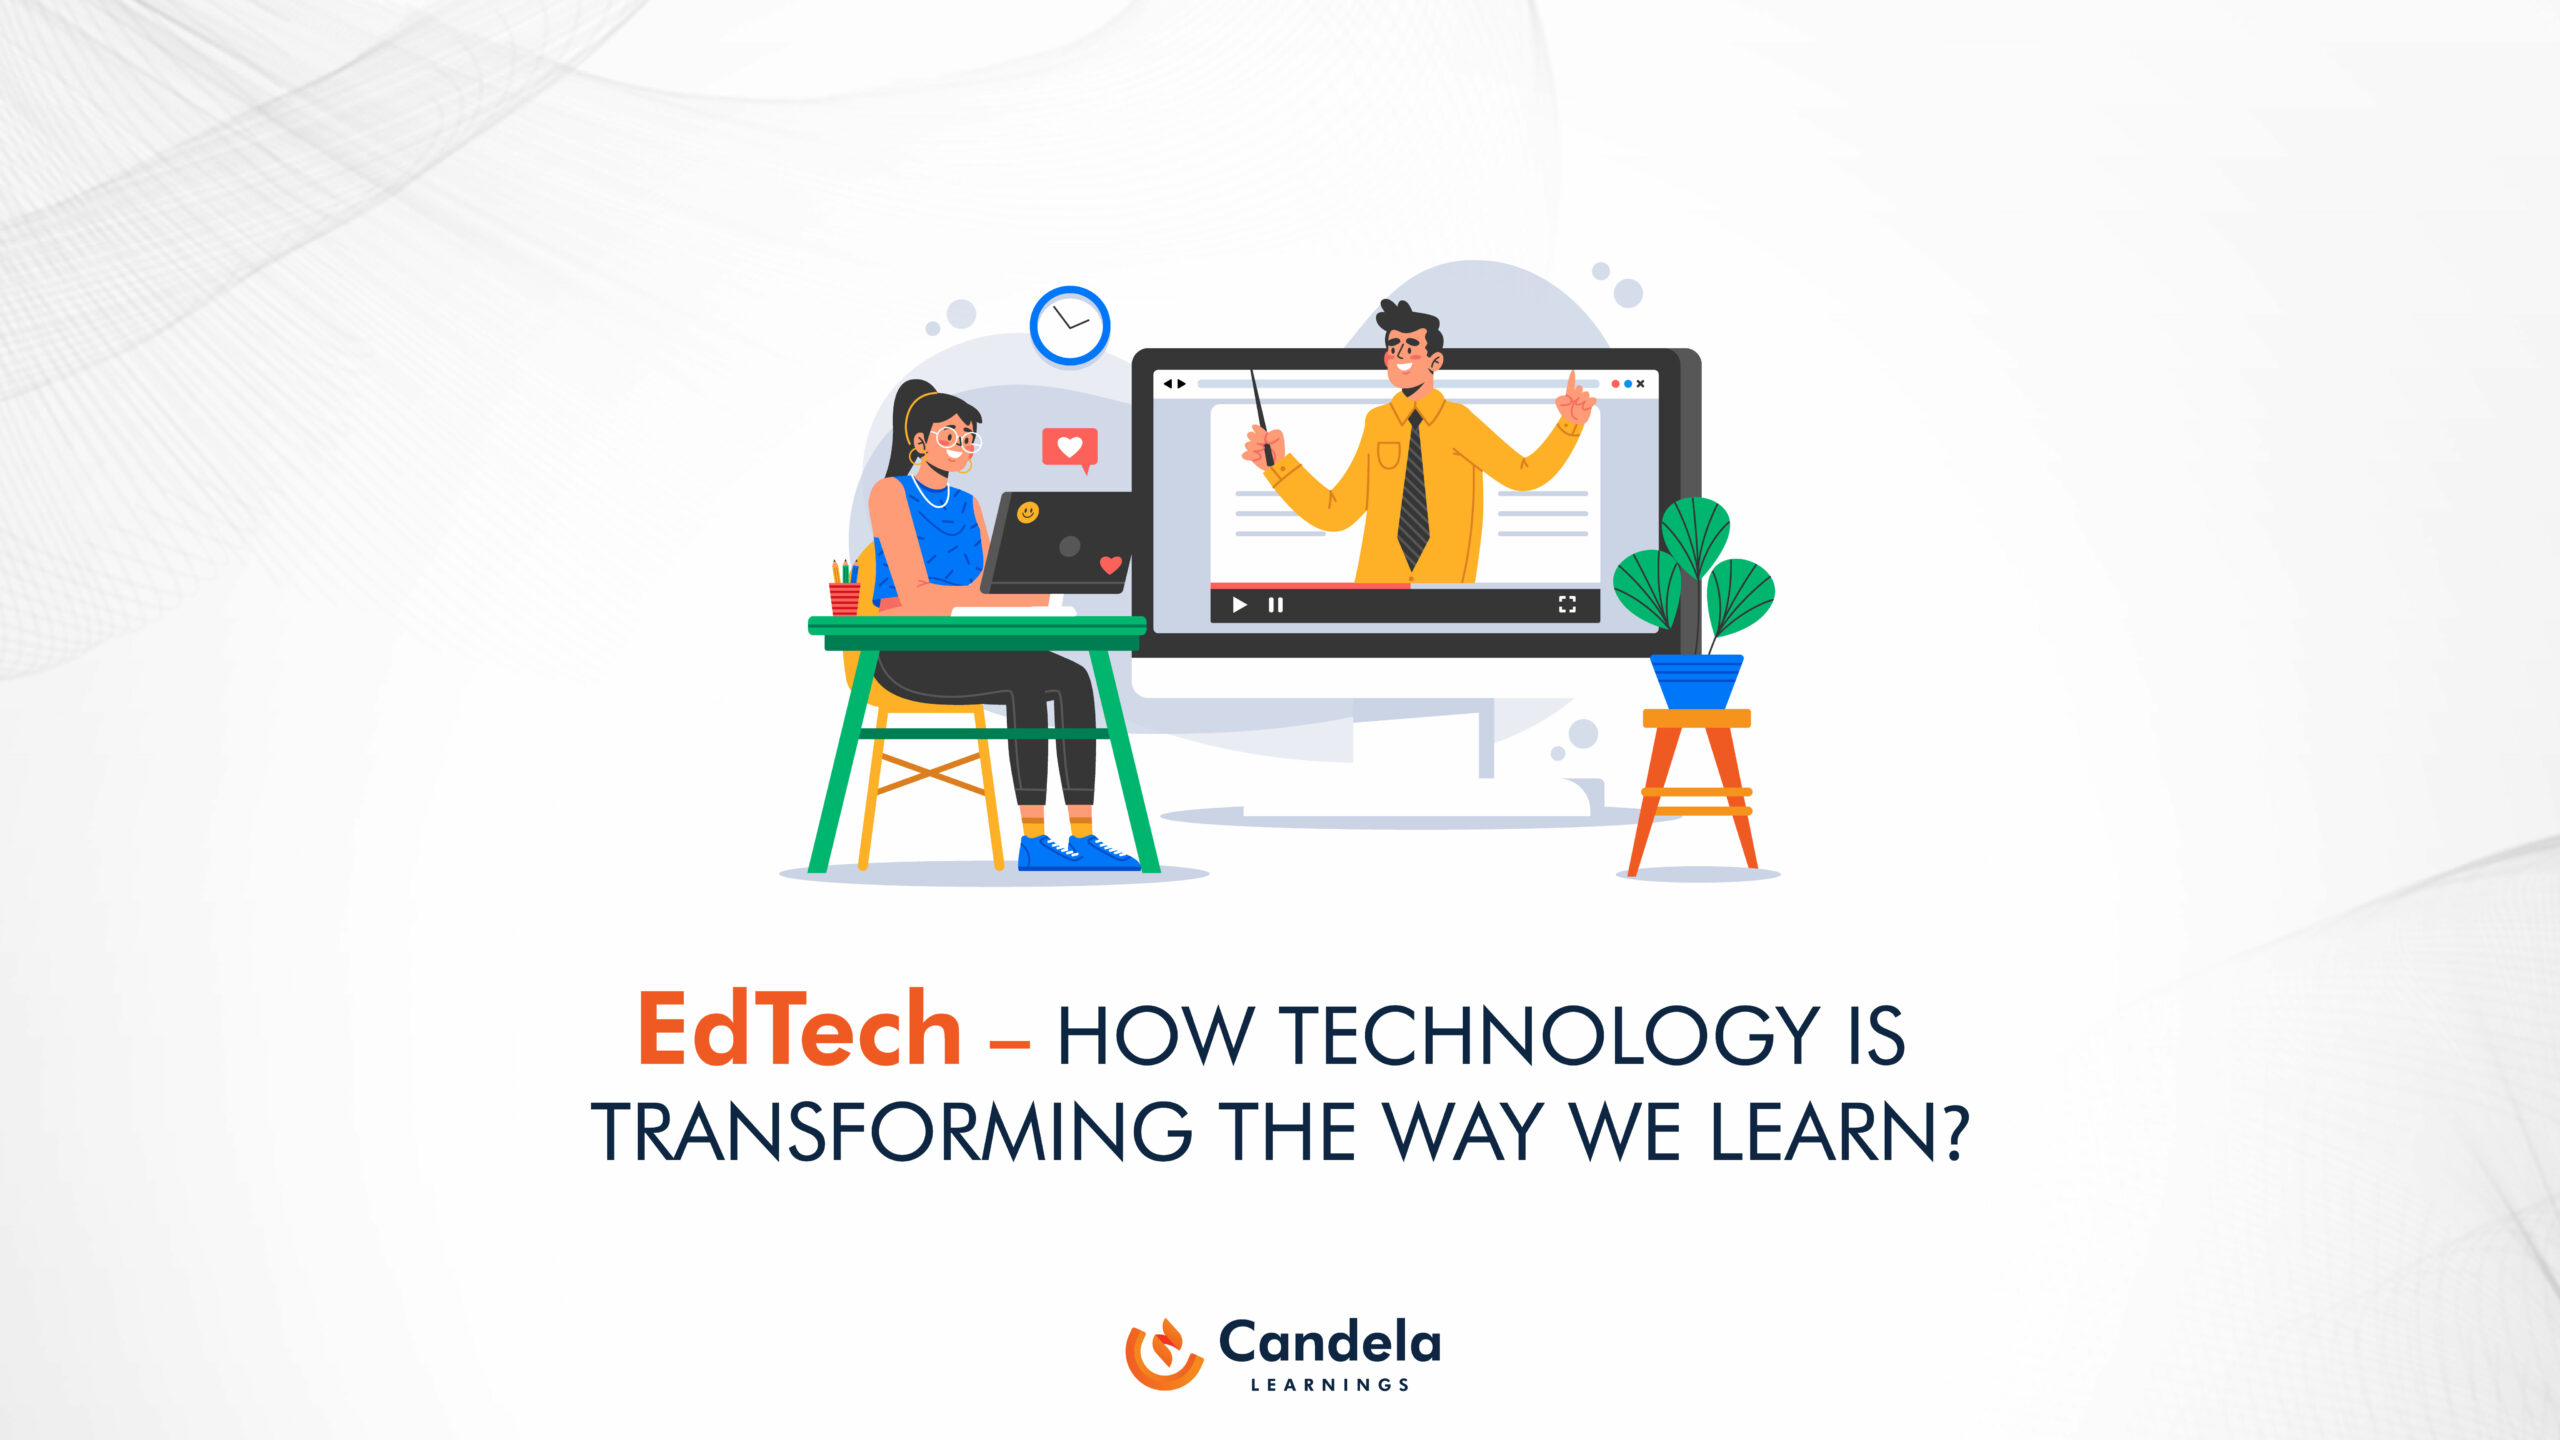 candela learnings, edtech, online learning, e-learning, experiential learnings, individual paced learning, learning style, online study, online education,